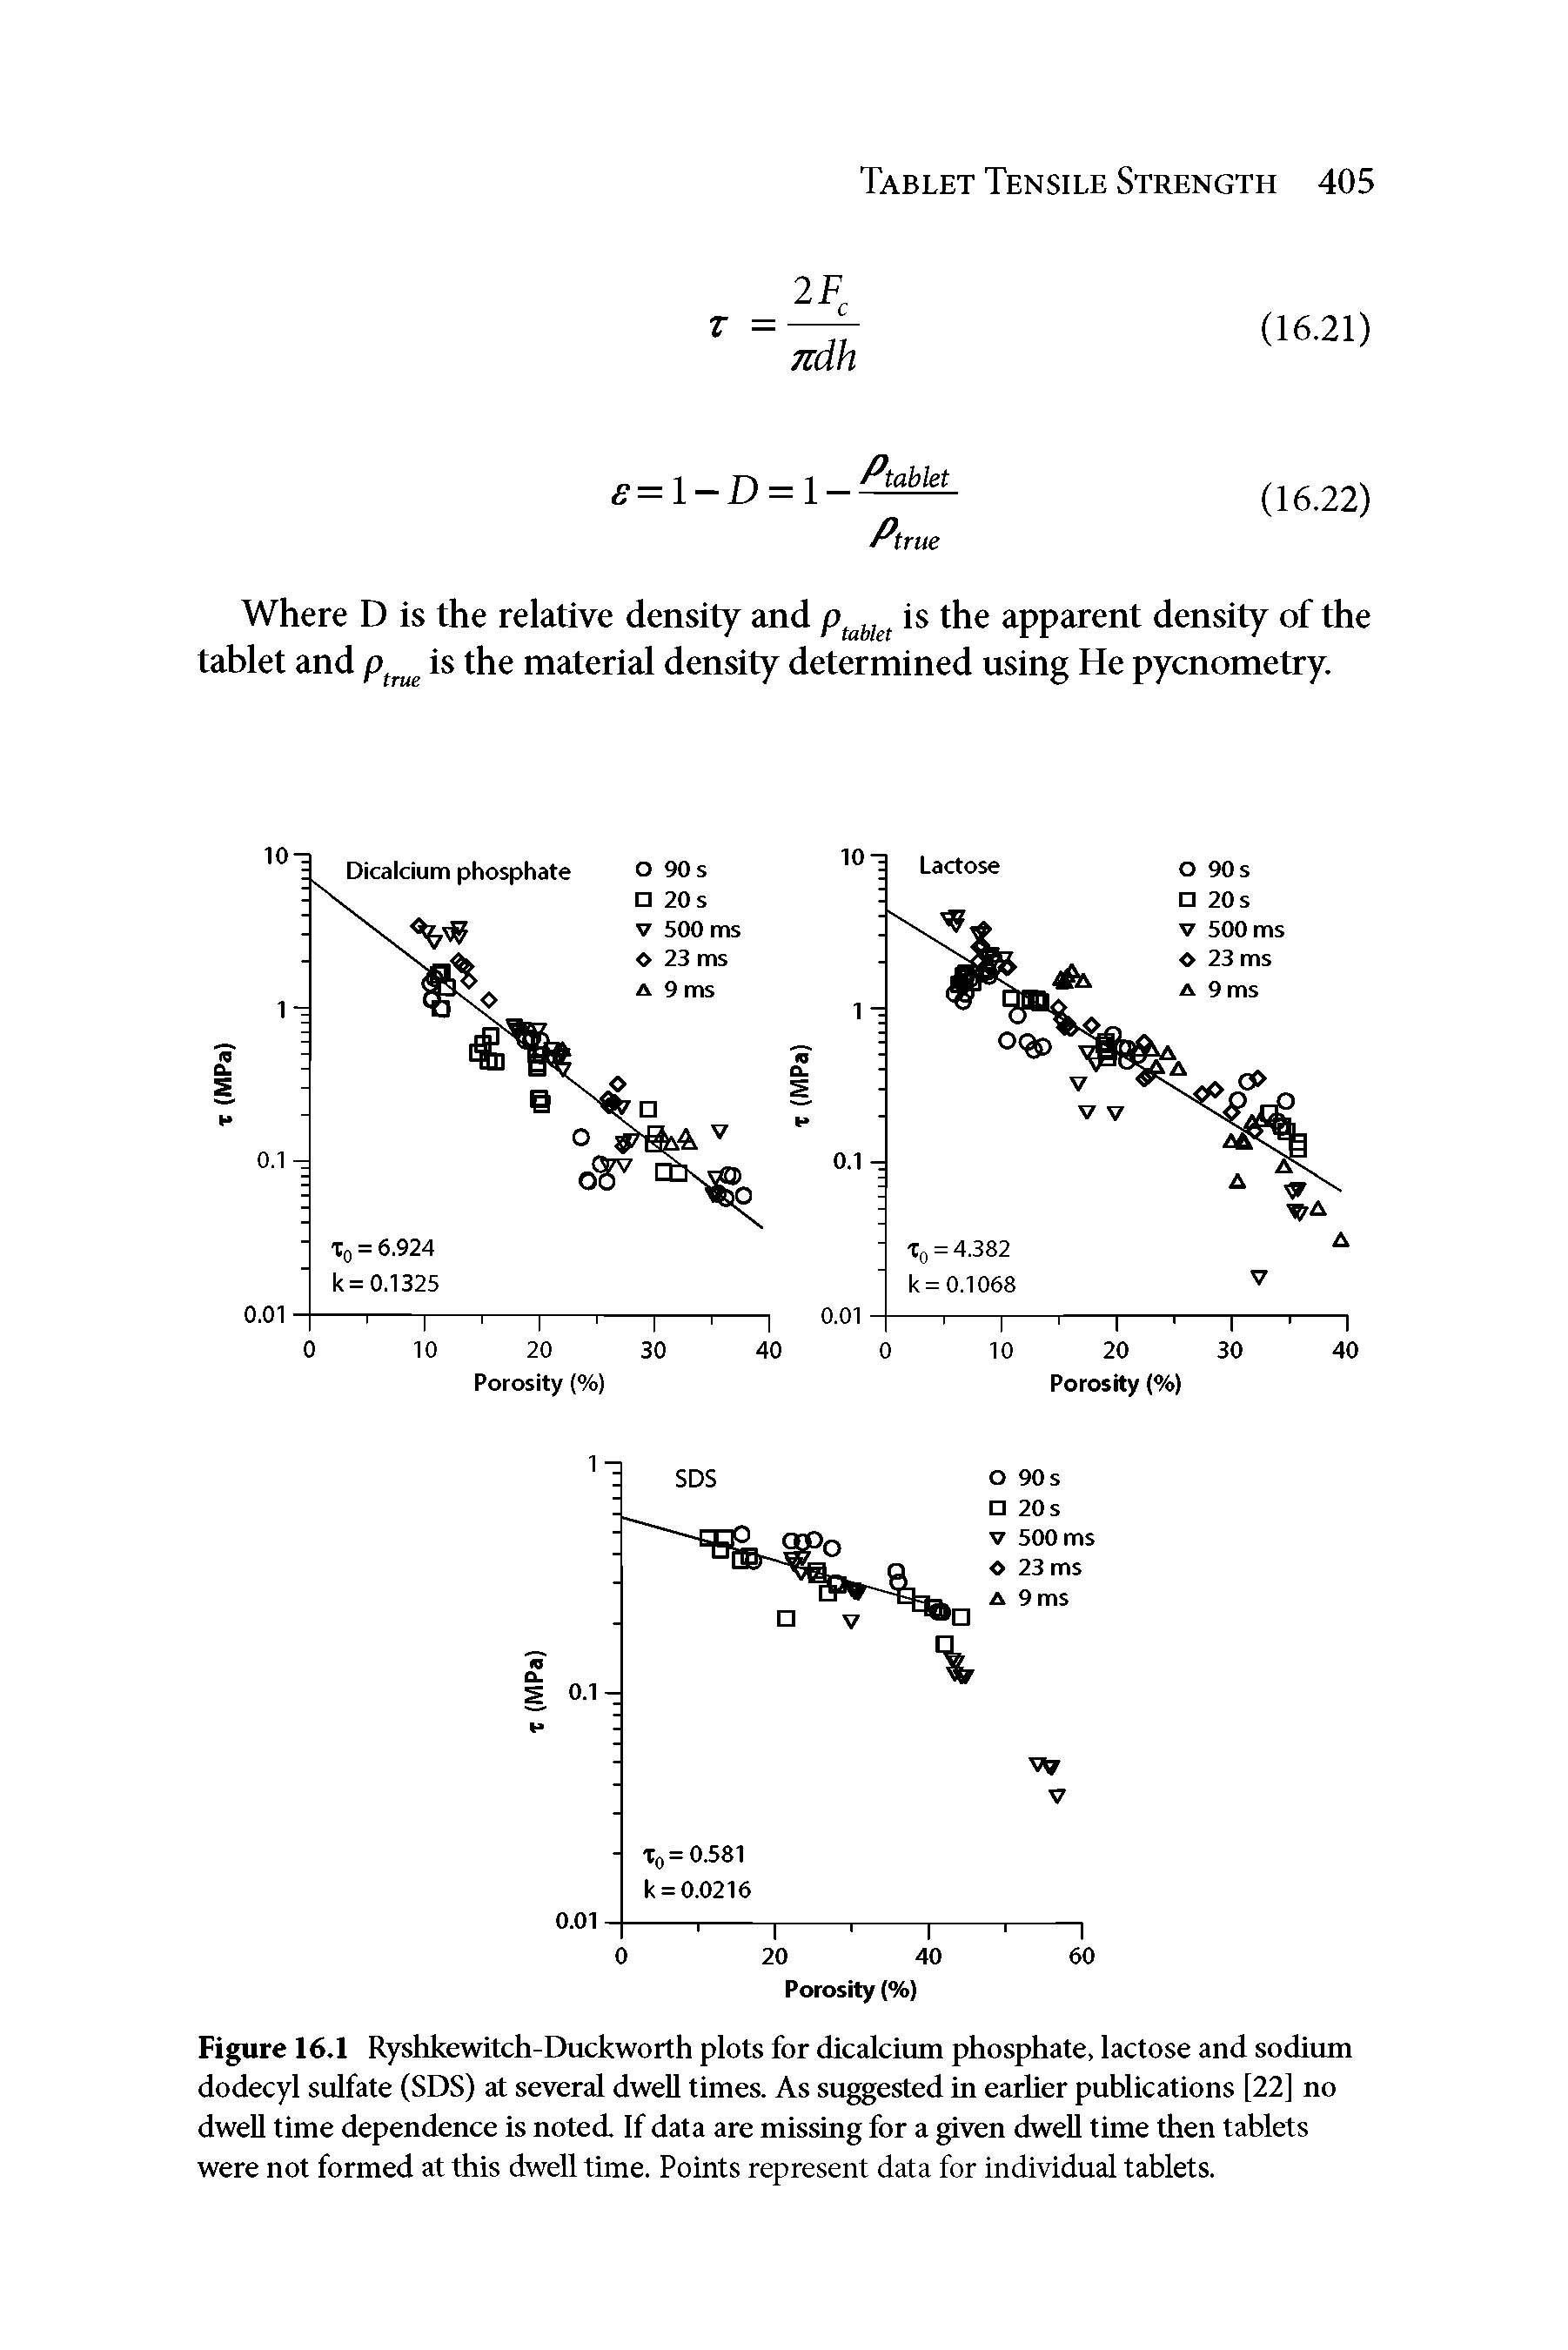 Figure 16.1 Ryshkewitch-Duckworth plots for dicalciuin phosphate, lactose and sodium dodecyl sulfate (SDS) at several dwell times. As suggested in earher publications [22] no dwell time dependence is noted If data are missing for a given dwell time then tablets were not formed at this dwell time. Points represent data for individual tablets.